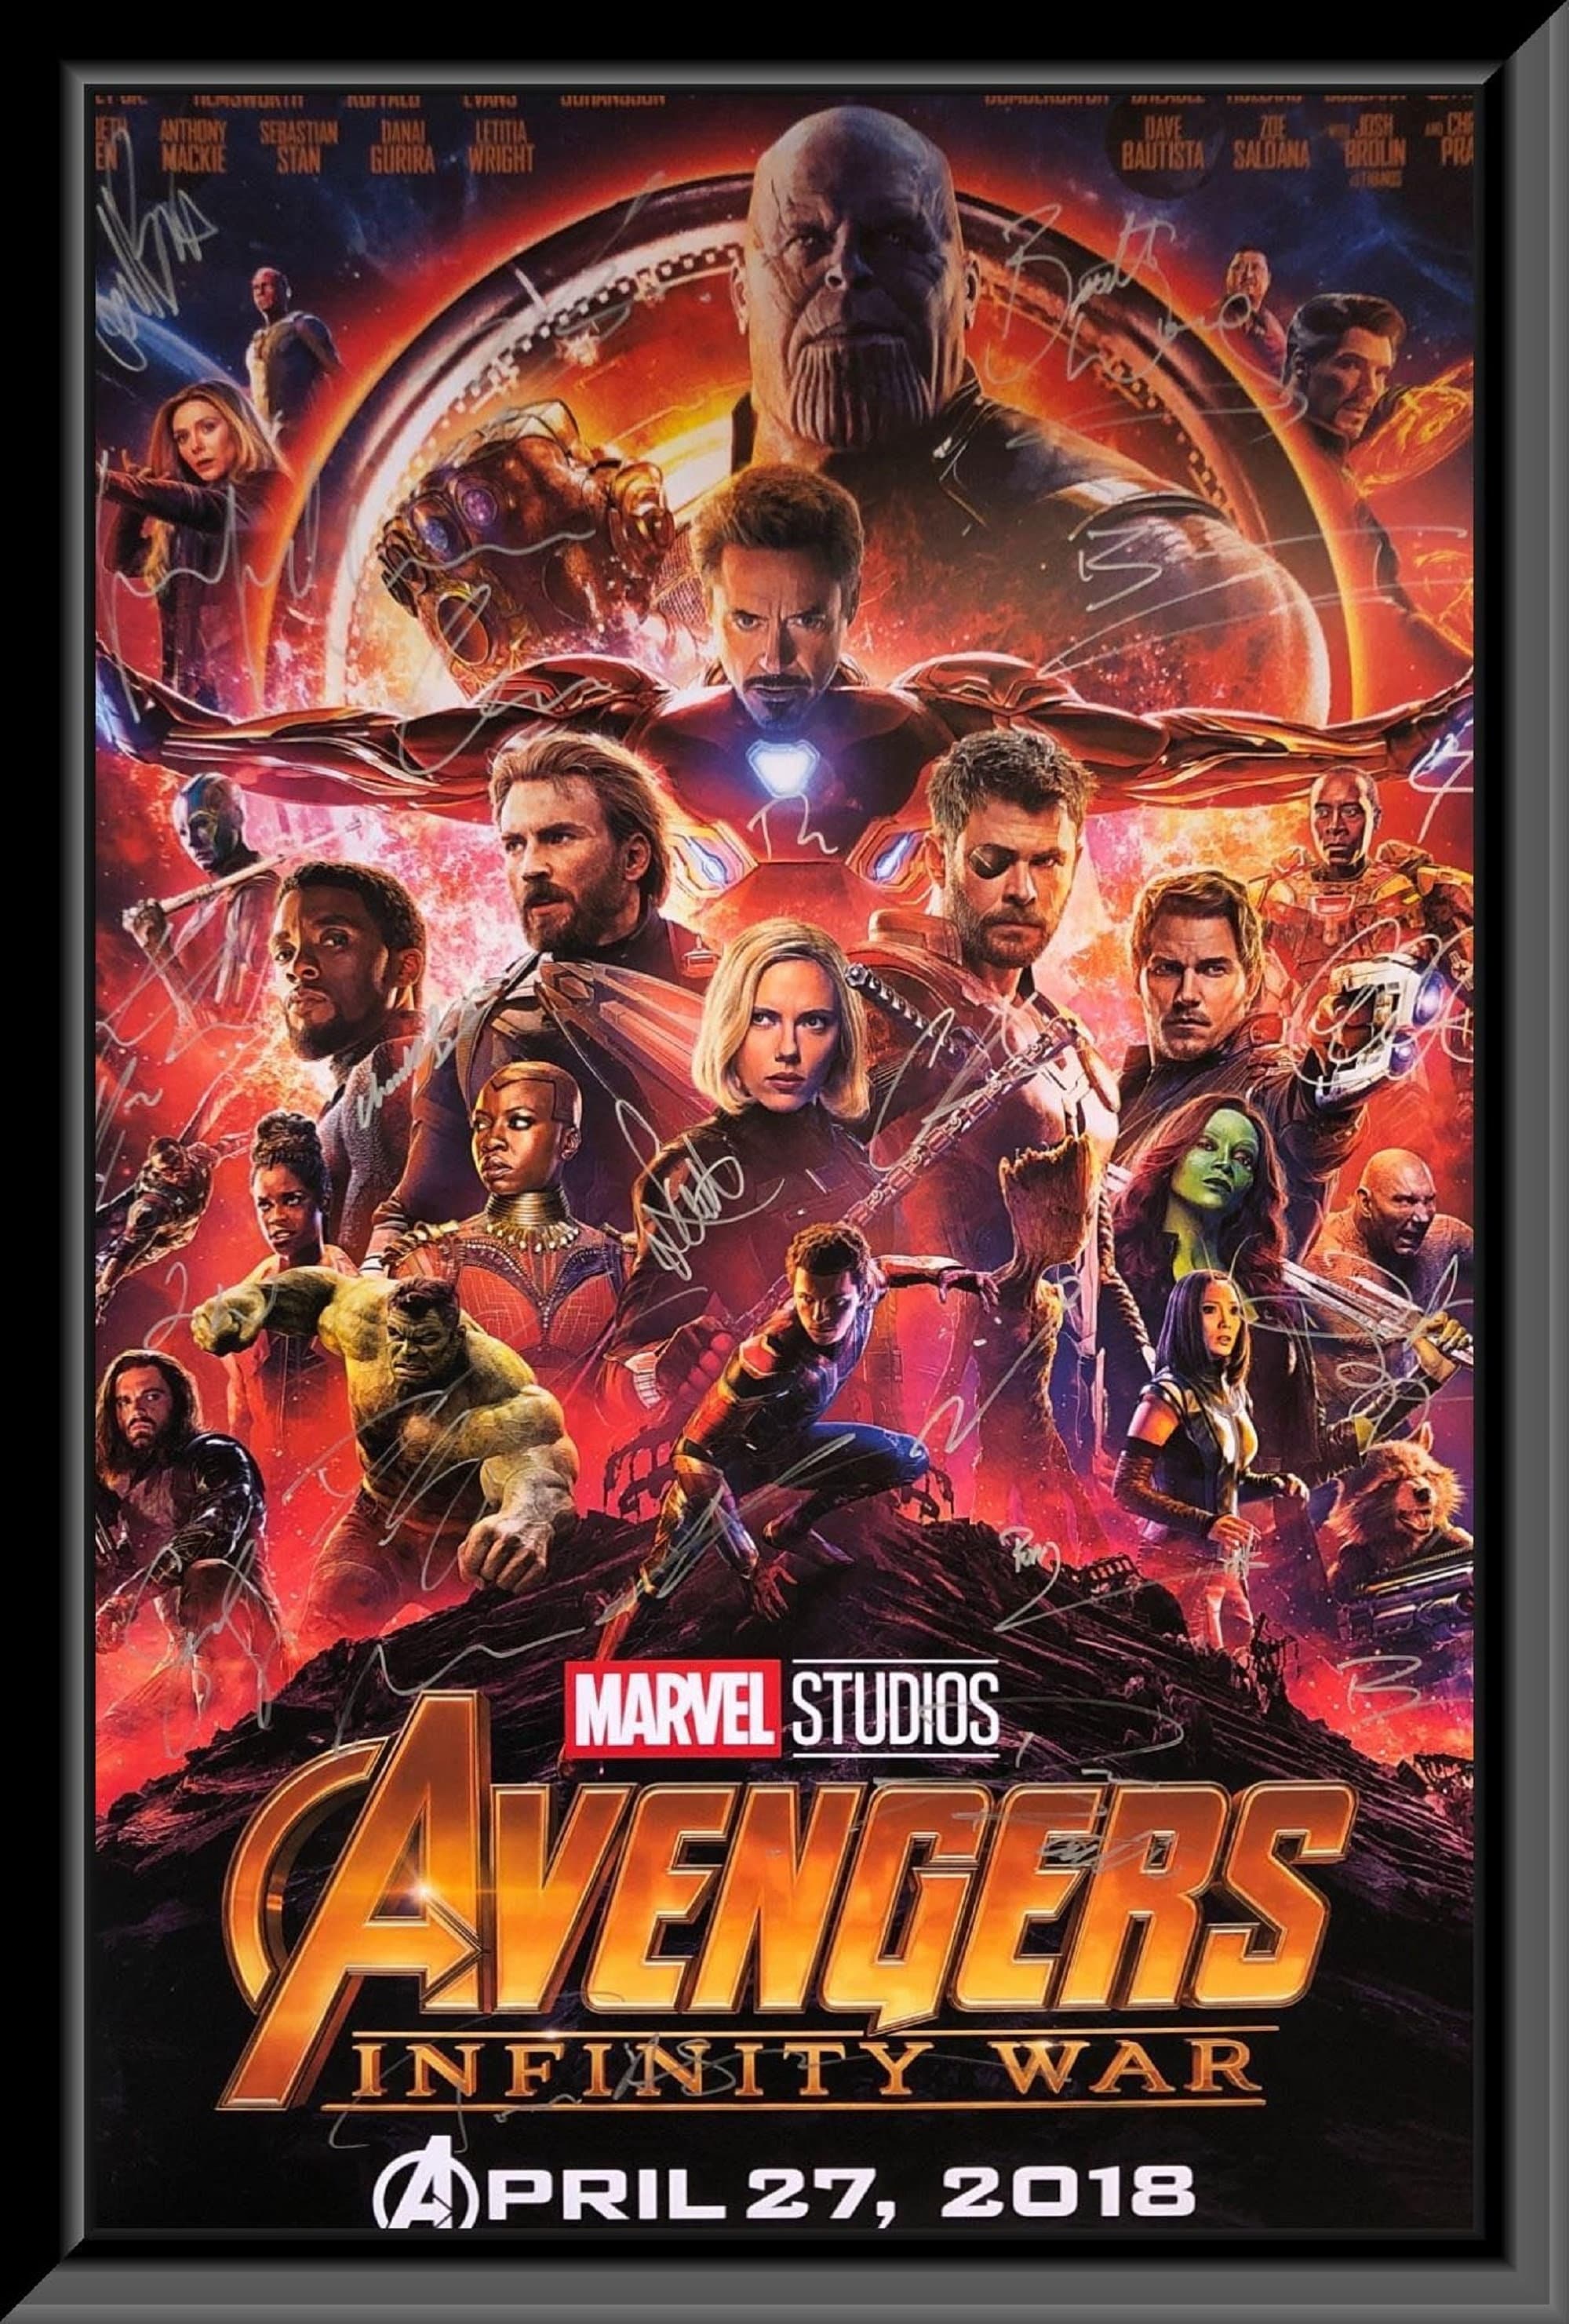 THE AVENGERS INFINITY WAR POSTER HH7 PRINT A4 A3 SIZE BUY 2 GET ANY 2 FREE 